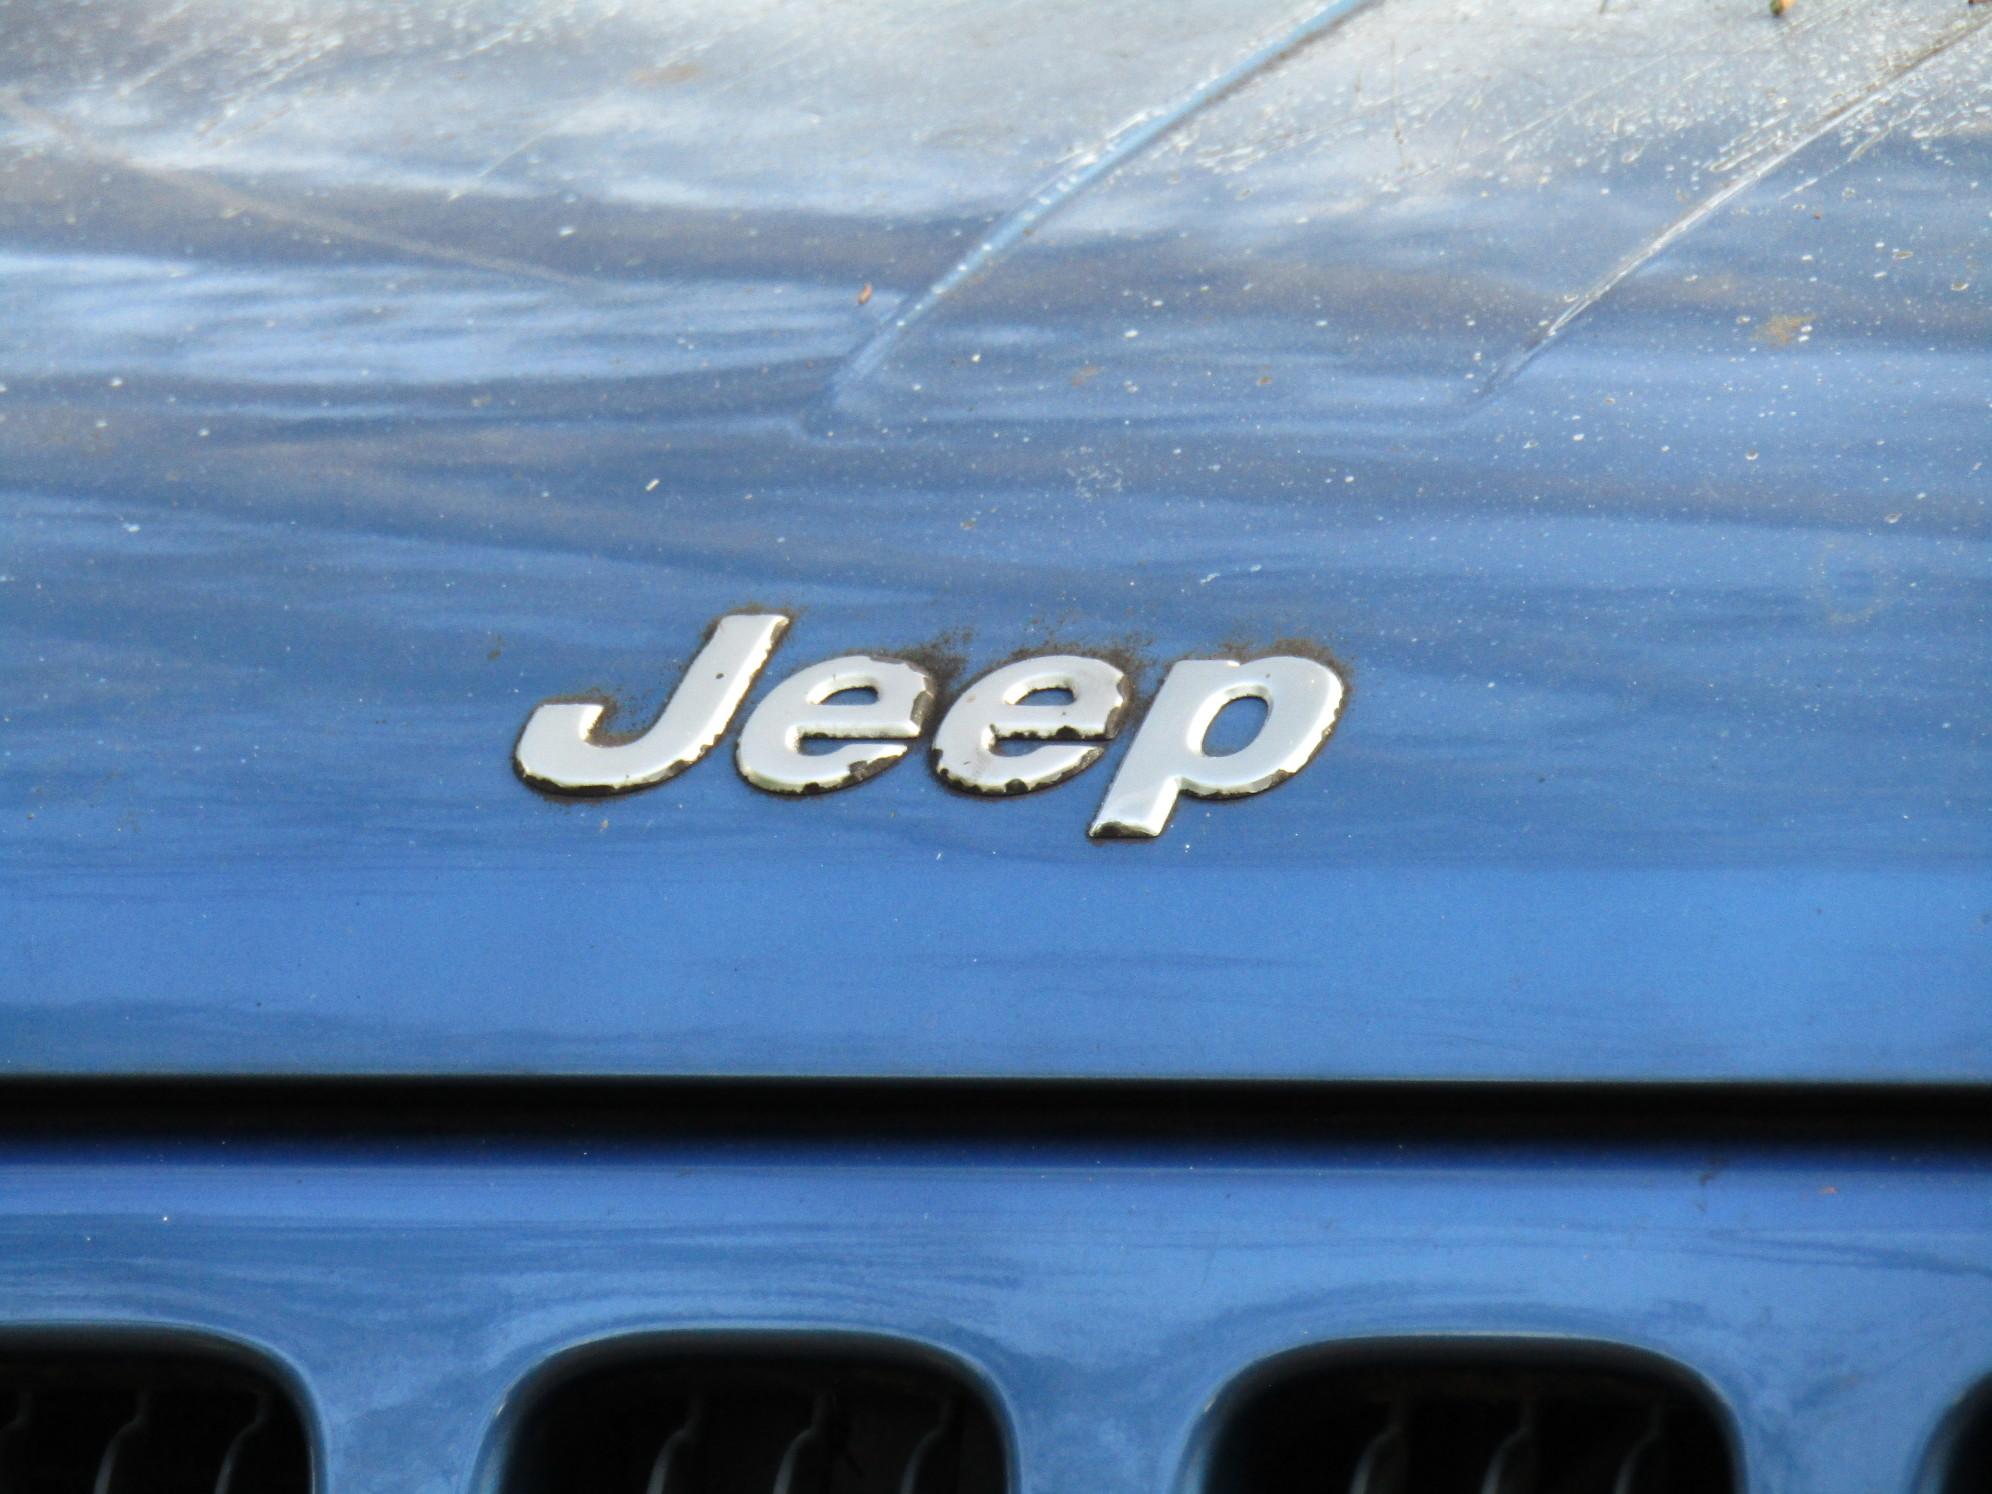 Jeep is facing some pressure to change the name of one of its models.